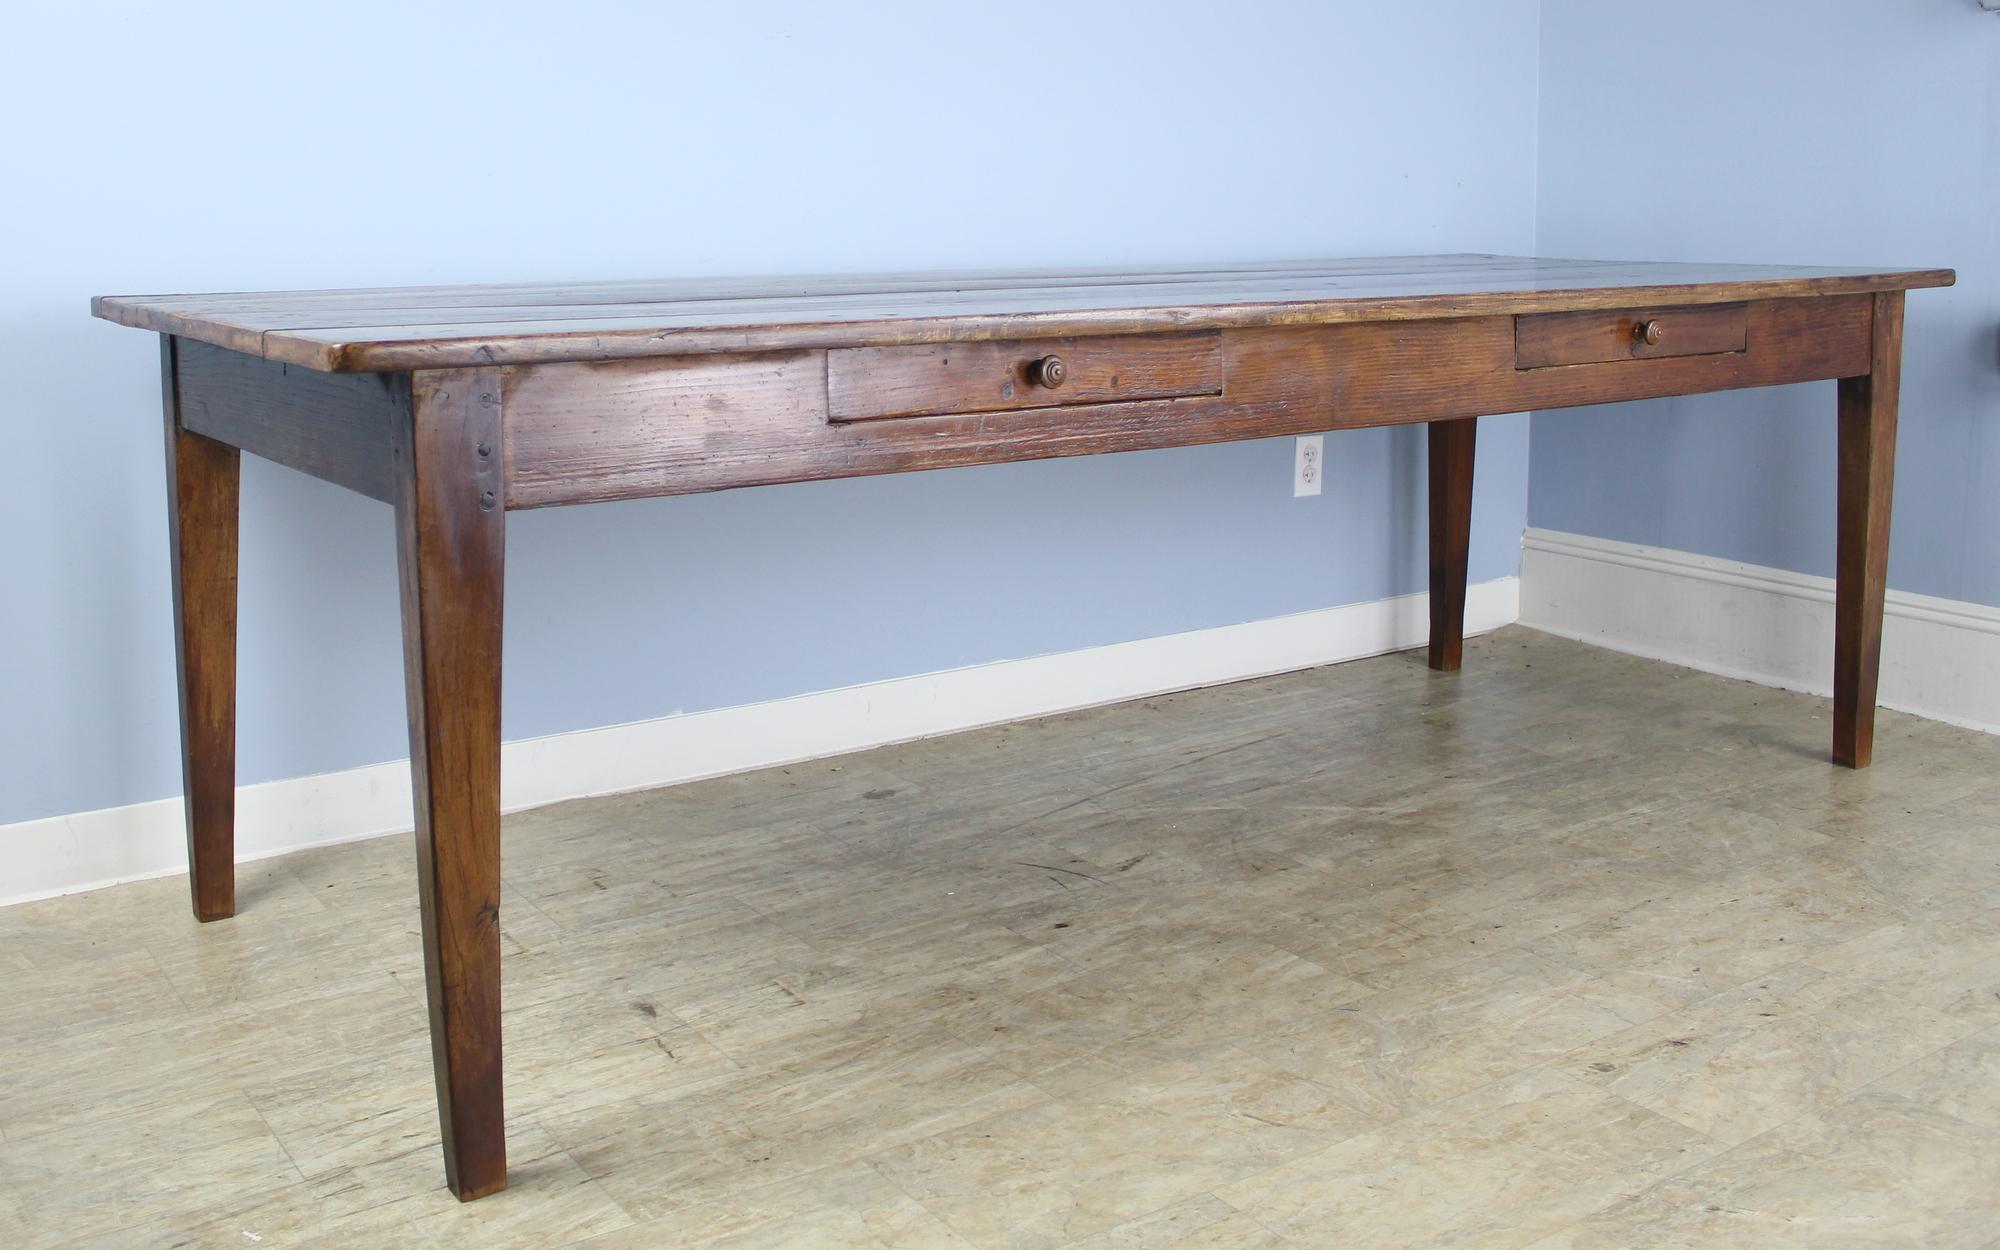 This long table is also wide, providing excellent space for dining. It is very good looking, with lovely mellow grain, little distress, and strong tapered legs. The two drawers on one side add a note of whimsey. Apron height is a good 24.75